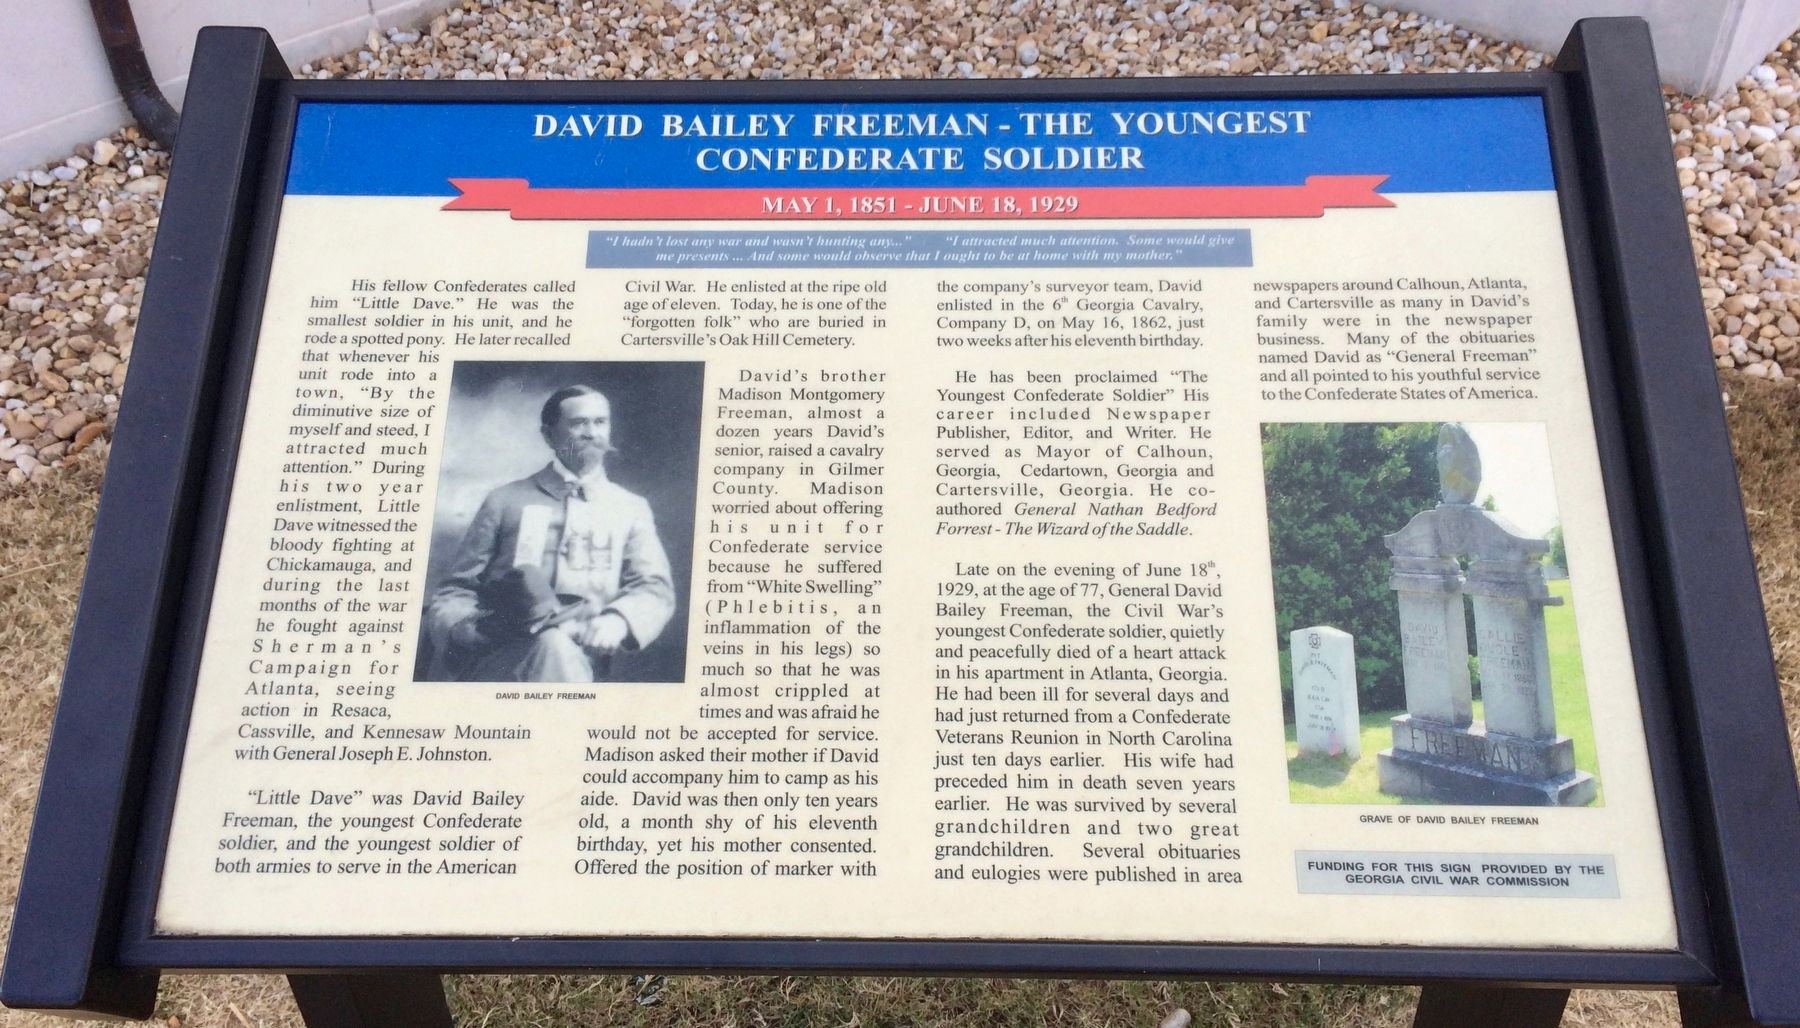 David Bailey Freeman - The Youngest Confederate Soldier Marker image. Click for full size.